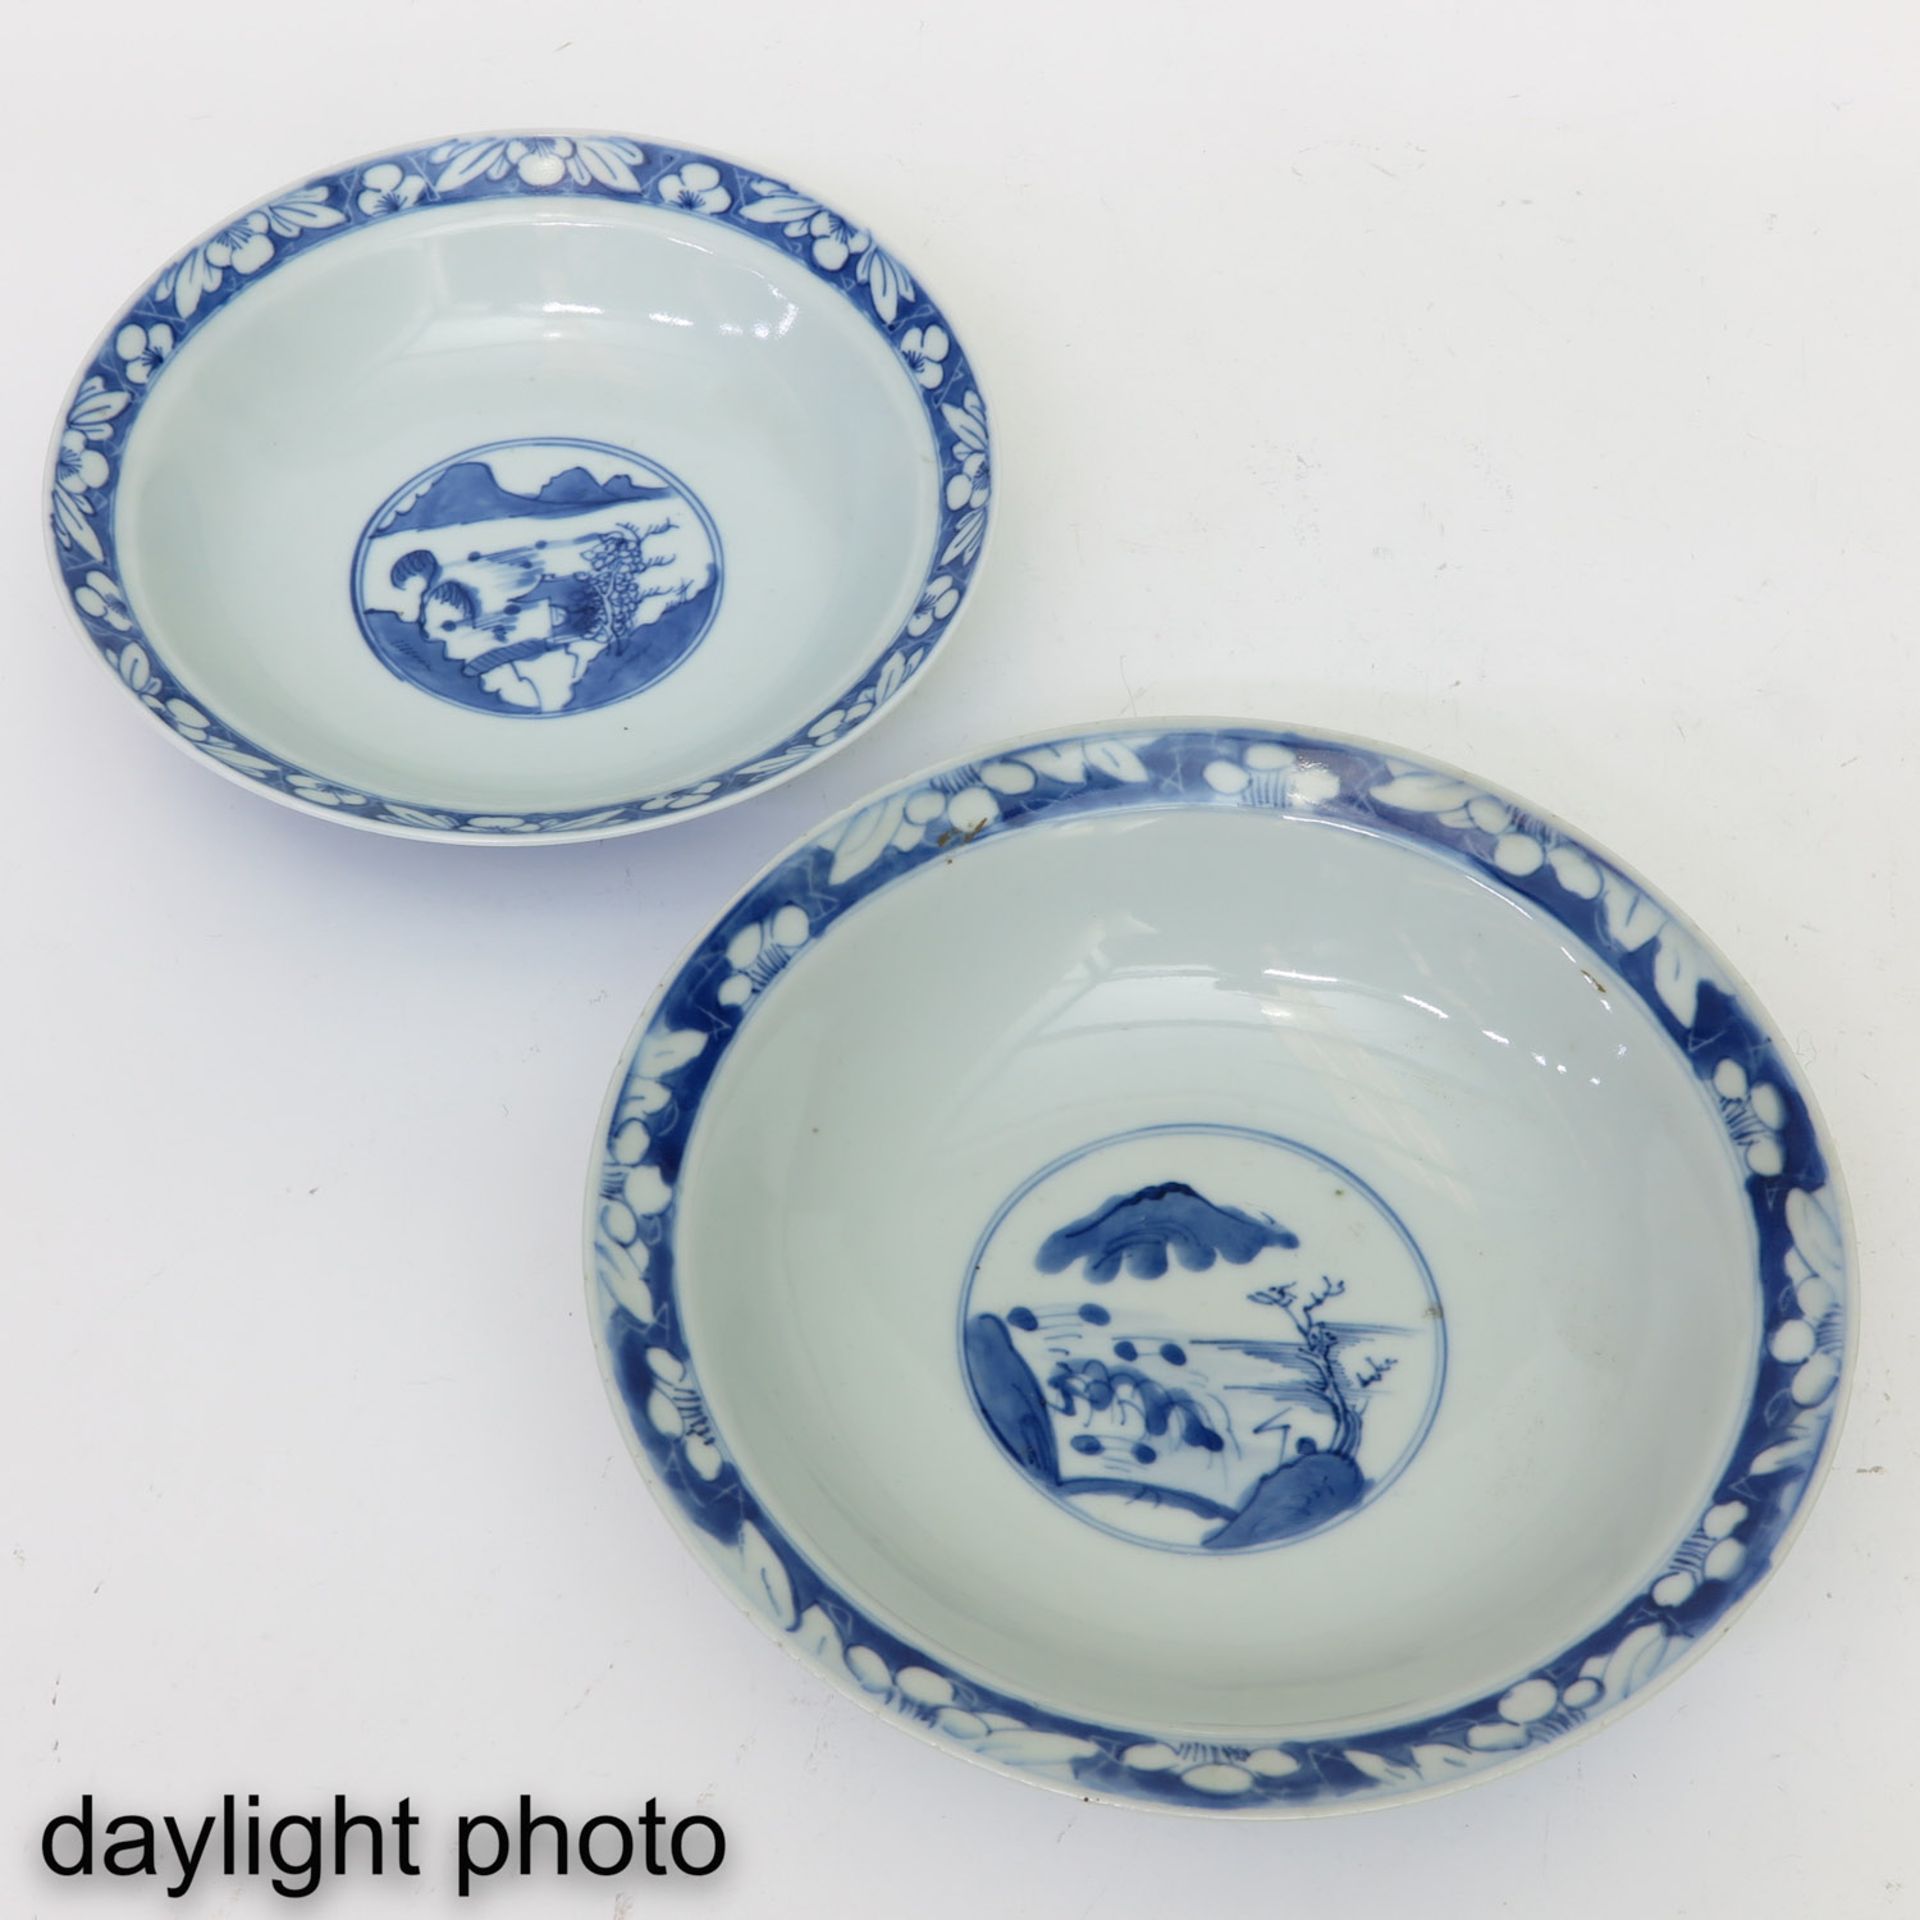 A Series of 4 Blue and White Bowls - Image 7 of 10